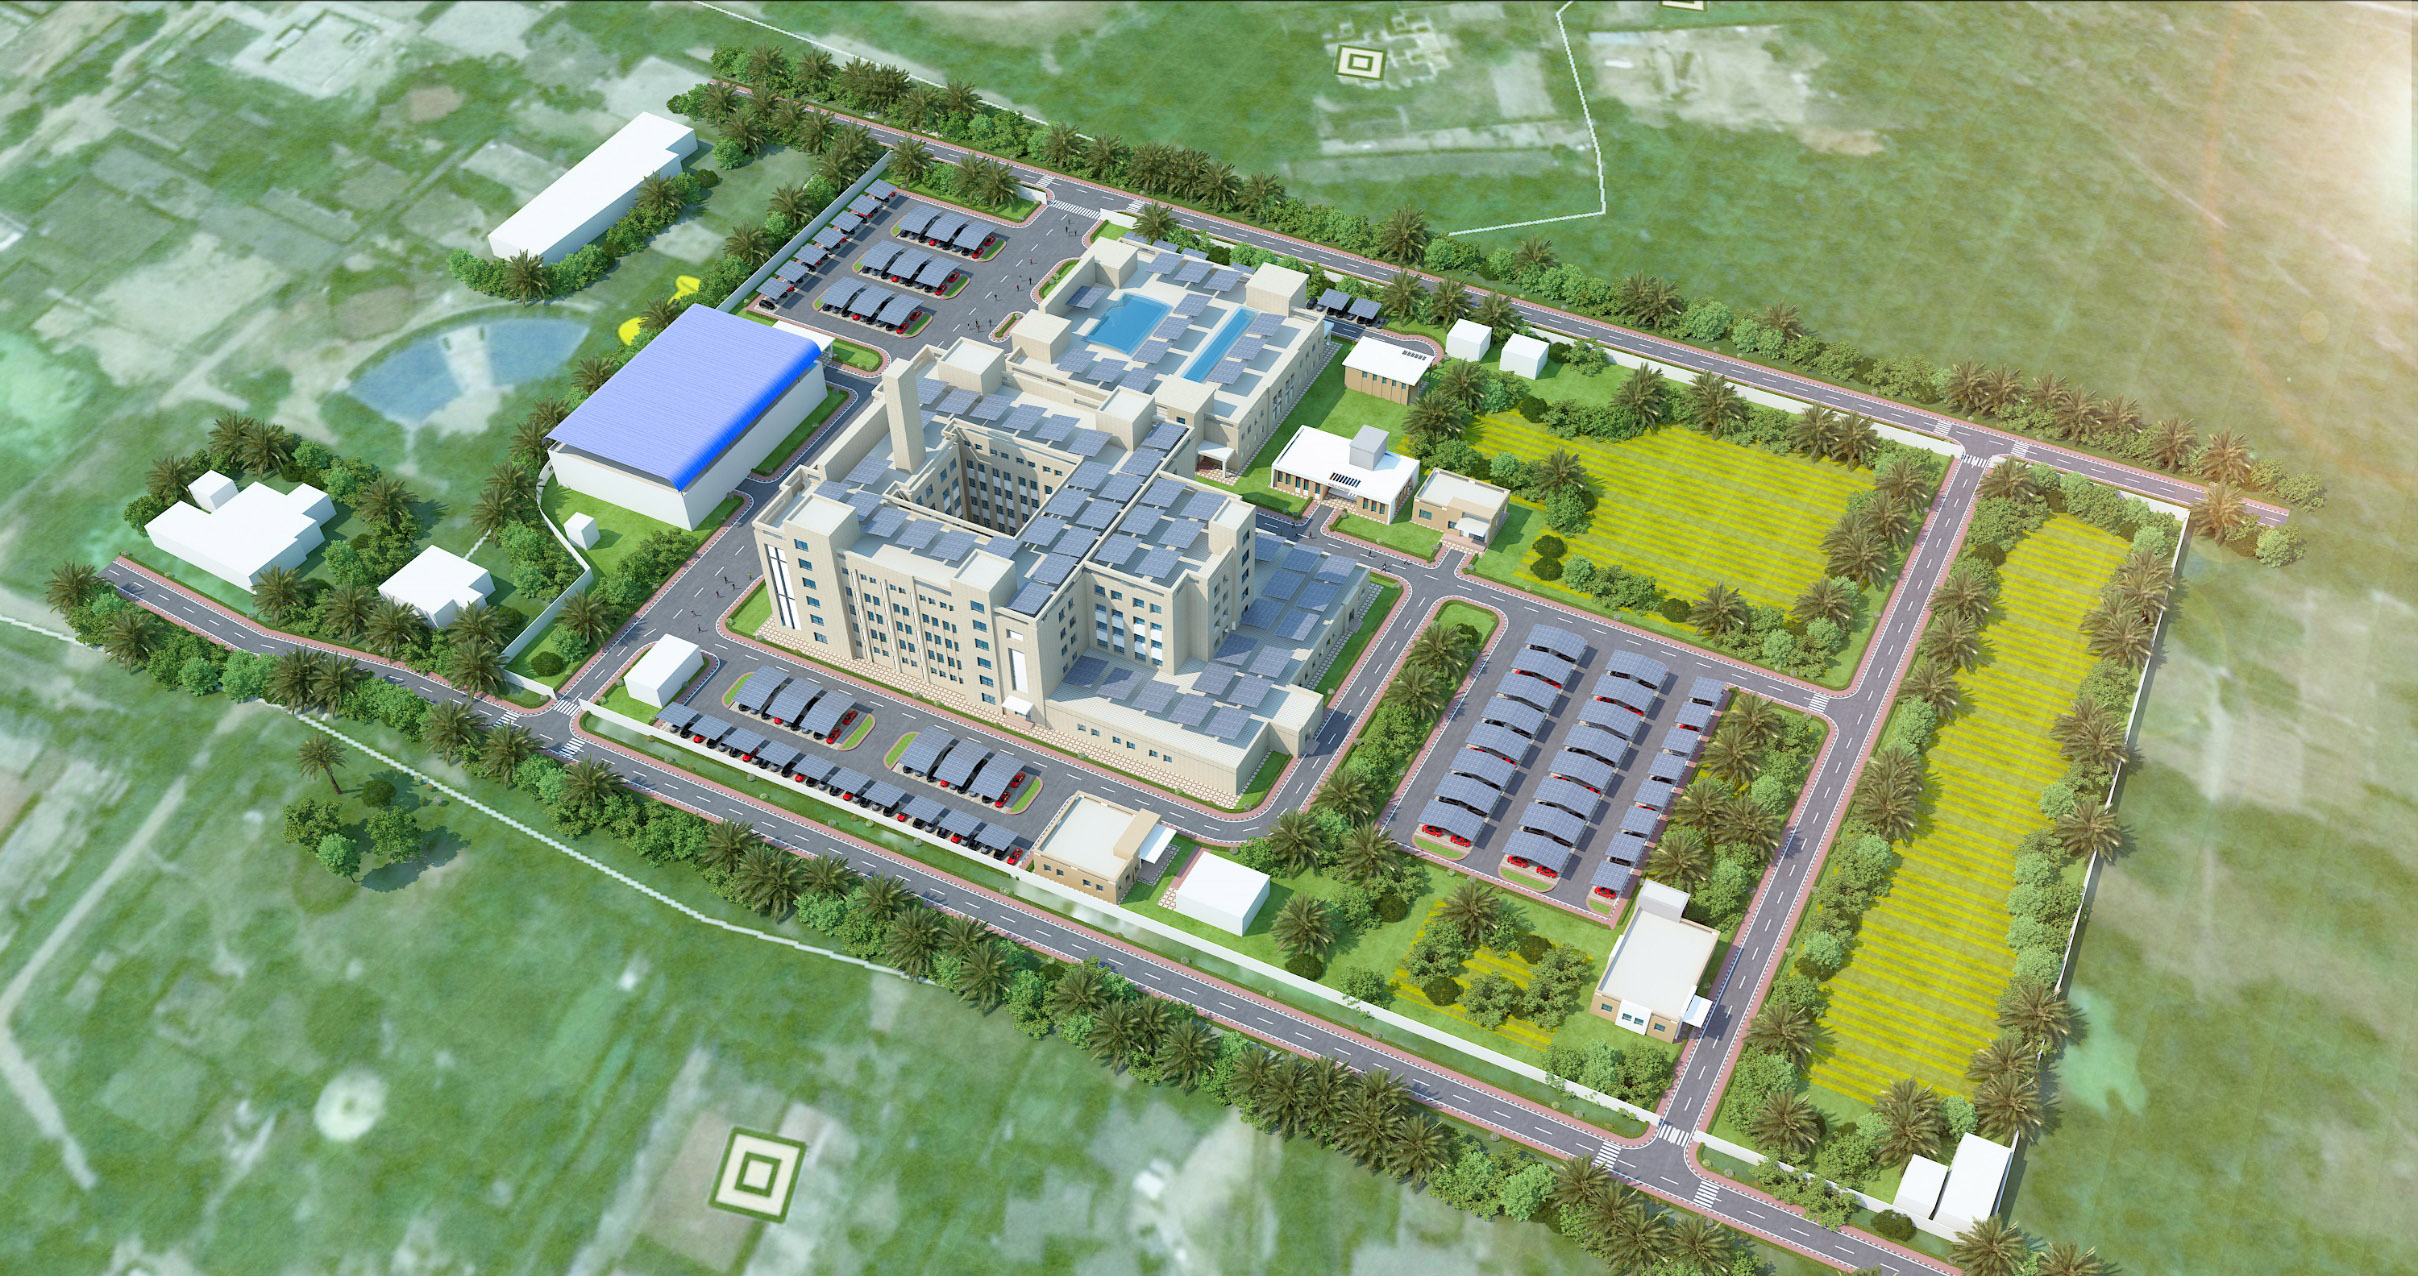 HOMI BHABHA CANCER HOSPITAL AND RESEARCH CENTRE TOP VIEW